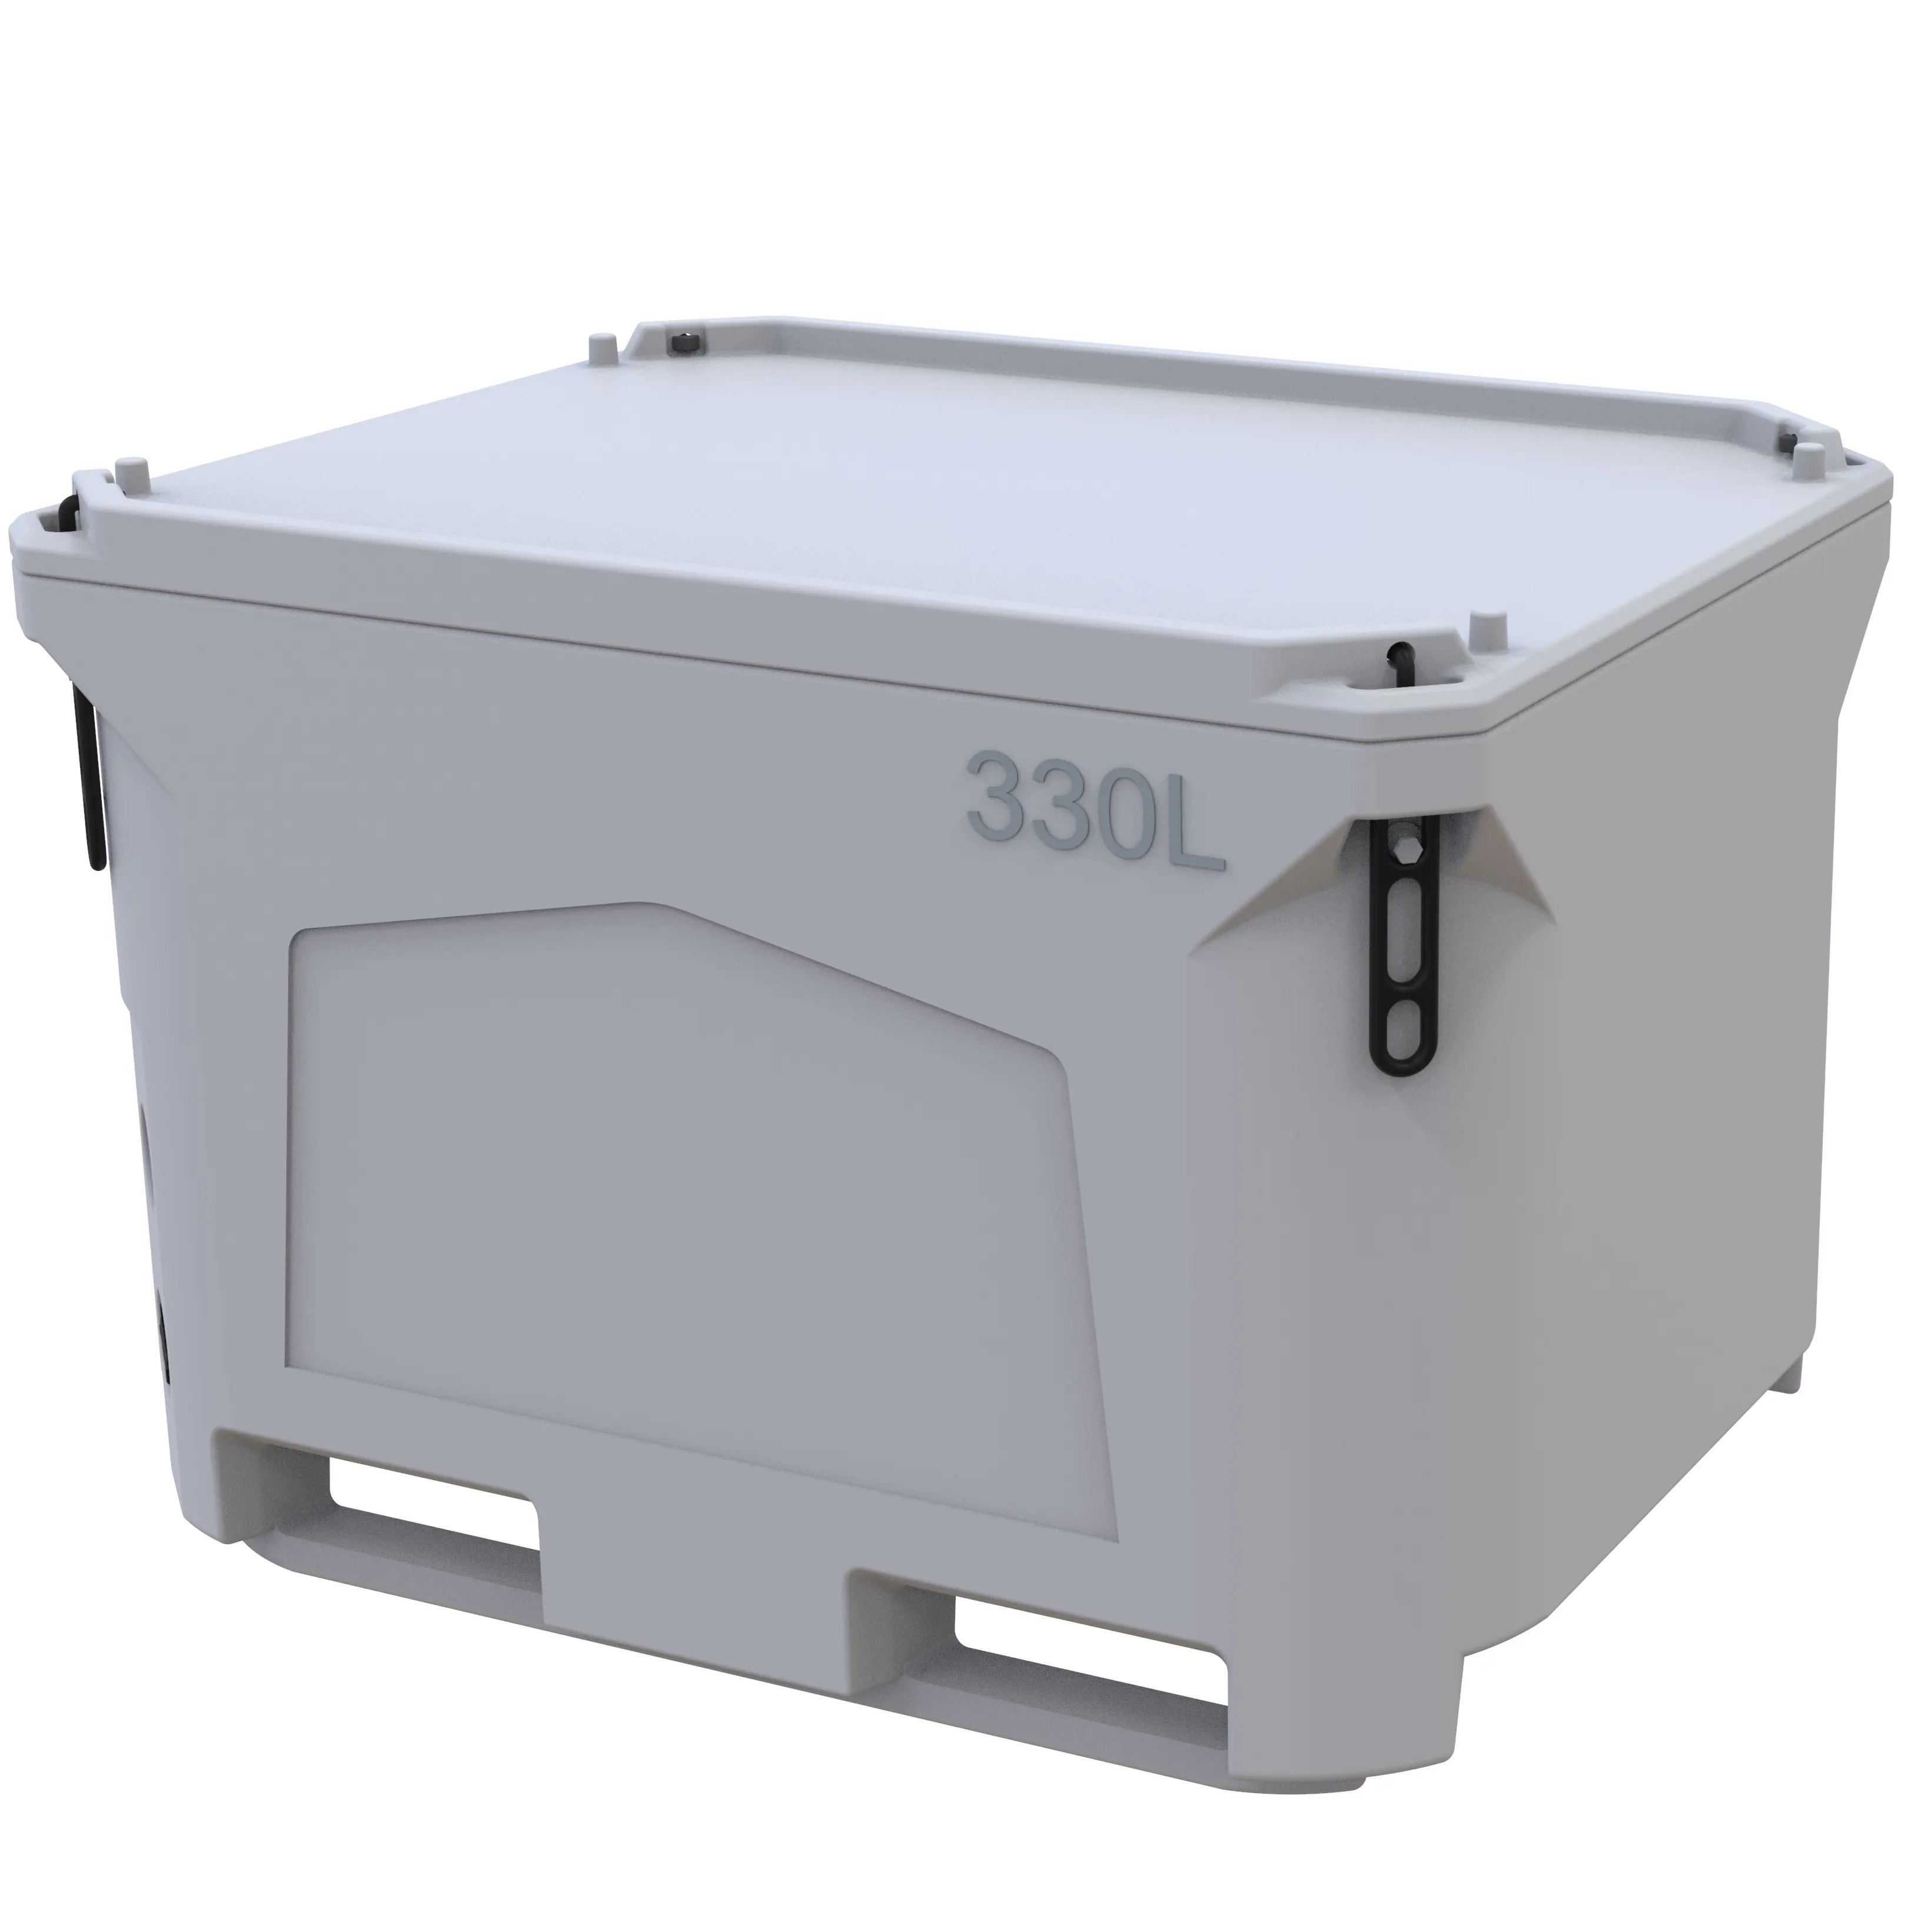 330QT Commerical Fishing Rotomold Seafood Fishing Ice Box Cooler Container Bin Plastic Ice Chest Factory Price for Transport